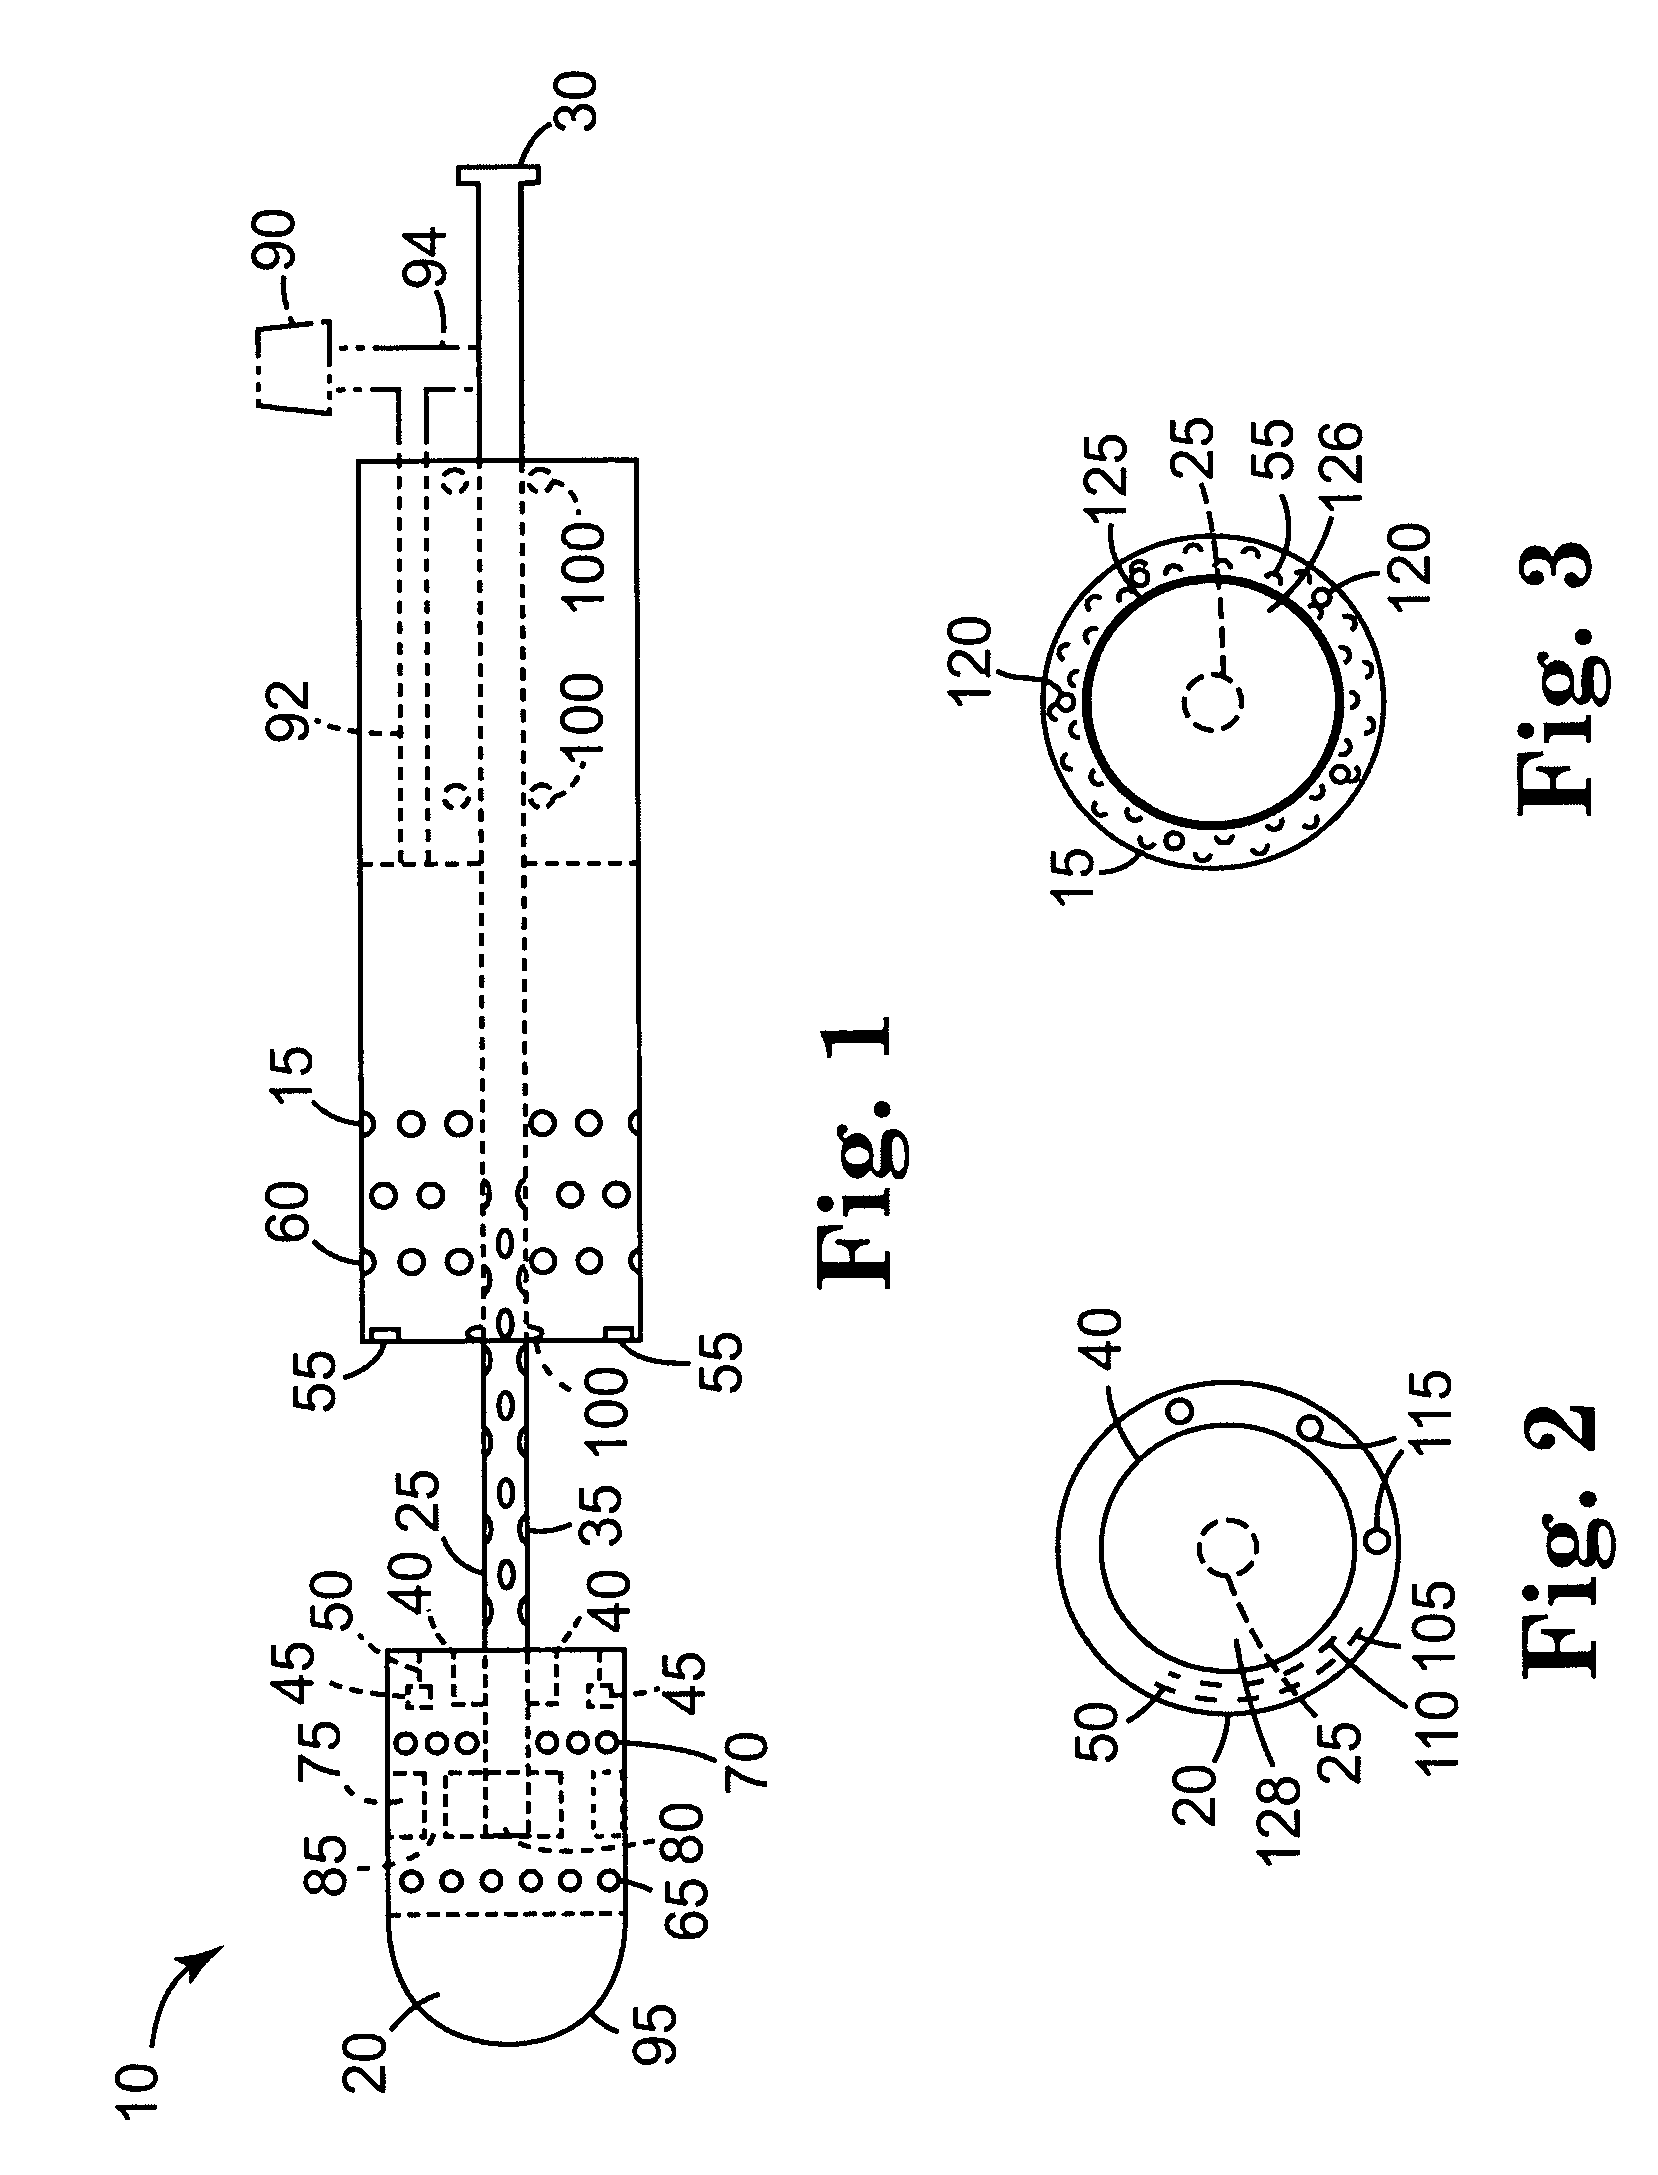 Resection and anastomosis devices and methods